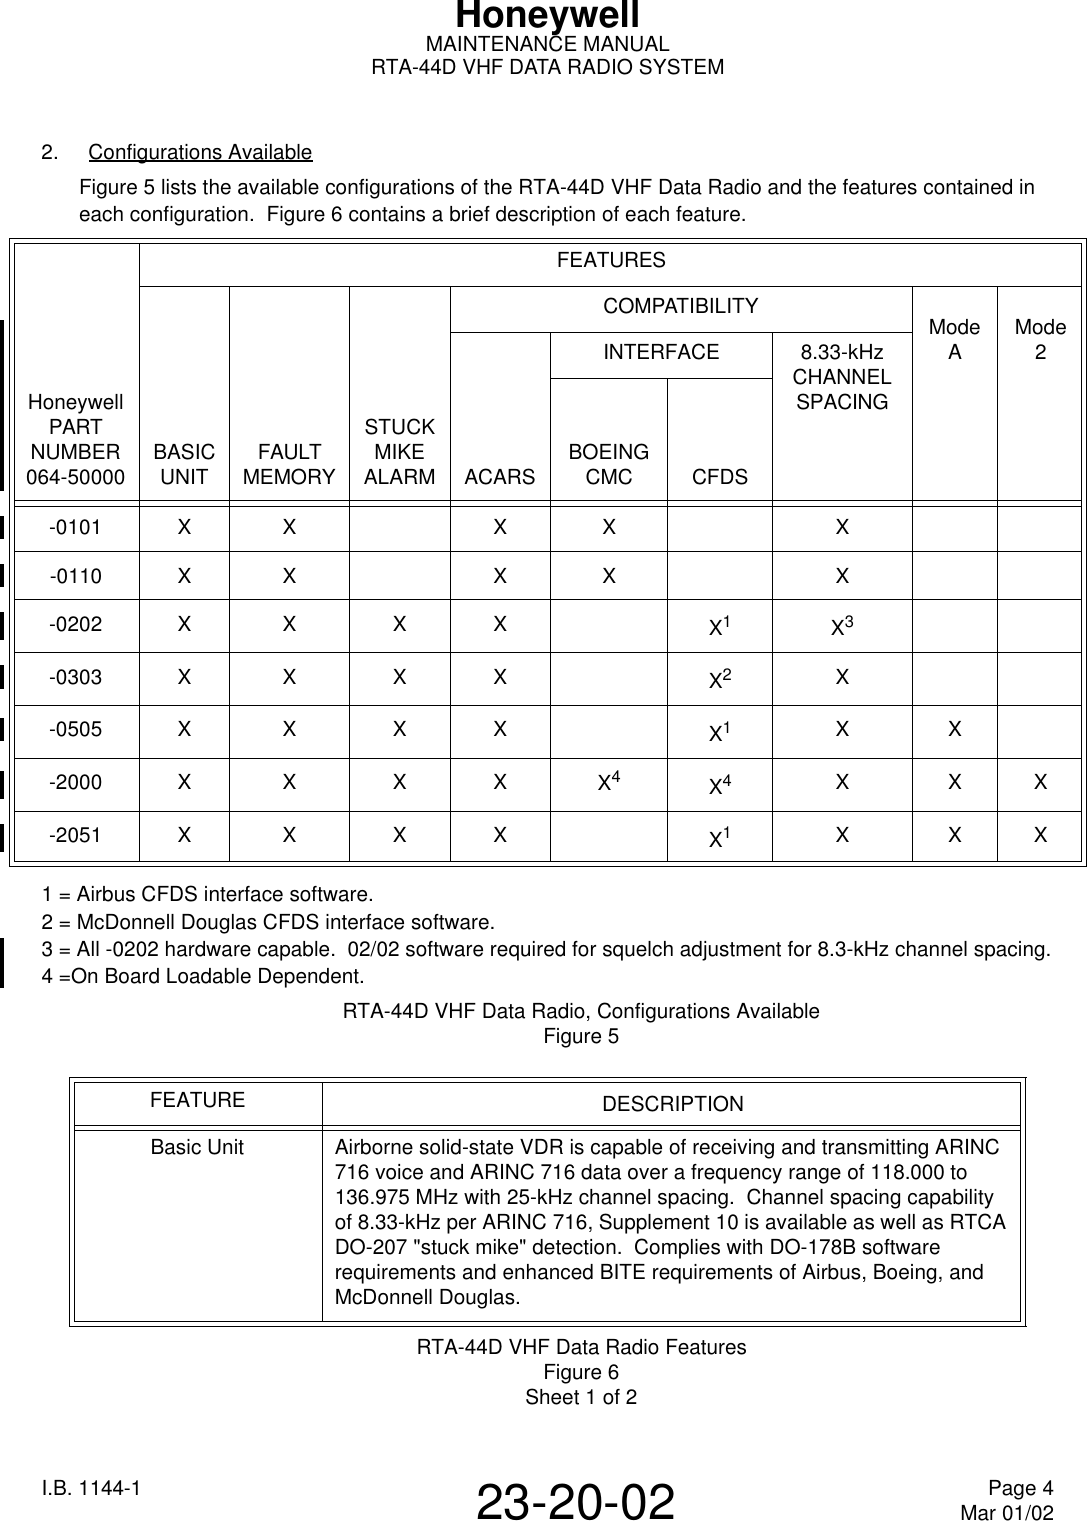 I.B. 1144-1 Page 4Mar 01/0223-20-02HoneywellMAINTENANCE MANUALRTA-44D VHF DATA RADIO SYSTEM2.  Configurations AvailableFigure 5 lists the available configurations of the RTA-44D VHF Data Radio and the features contained in each configuration.  Figure6 contains a brief description of each feature.1 = Airbus CFDS interface software.2 = McDonnell Douglas CFDS interface software.3 = All -0202 hardware capable.  02/02 software required for squelch adjustment for 8.3-kHz channel spacing.4 =On Board Loadable Dependent.RTA-44D VHF Data Radio, Configurations AvailableFigure 5RTA-44D VHF Data Radio FeaturesFigure 6Sheet 1 of 2HoneywellPART NUMBER 064-50000FEATURESBASIC UNIT FAULT MEMORYSTUCK MIKE ALARMCOMPATIBILITY Mode AMode 2ACARSINTERFACE 8.33-kHz CHANNEL SPACINGBOEINGCMC    CFDS-0101 X X X X X-0110 X X X X X-0202 X X X X X1X3-0303 X X X X X2X-0505 X X X X X1X X-2000 X X X X X4X4X X X-2051 X X X X X1X X XFEATURE DESCRIPTIONBasic Unit Airborne solid-state VDR is capable of receiving and transmitting ARINC 716 voice and ARINC 716 data over a frequency range of 118.000 to 136.975MHz with 25-kHz channel spacing.  Channel spacing capability of 8.33-kHz per ARINC716, Supplement10 is available as well as RTCA DO-207 &quot;stuckmike&quot; detection.  Complies with DO-178B software requirements and enhanced BITE requirements of Airbus, Boeing, and McDonnell Douglas. 